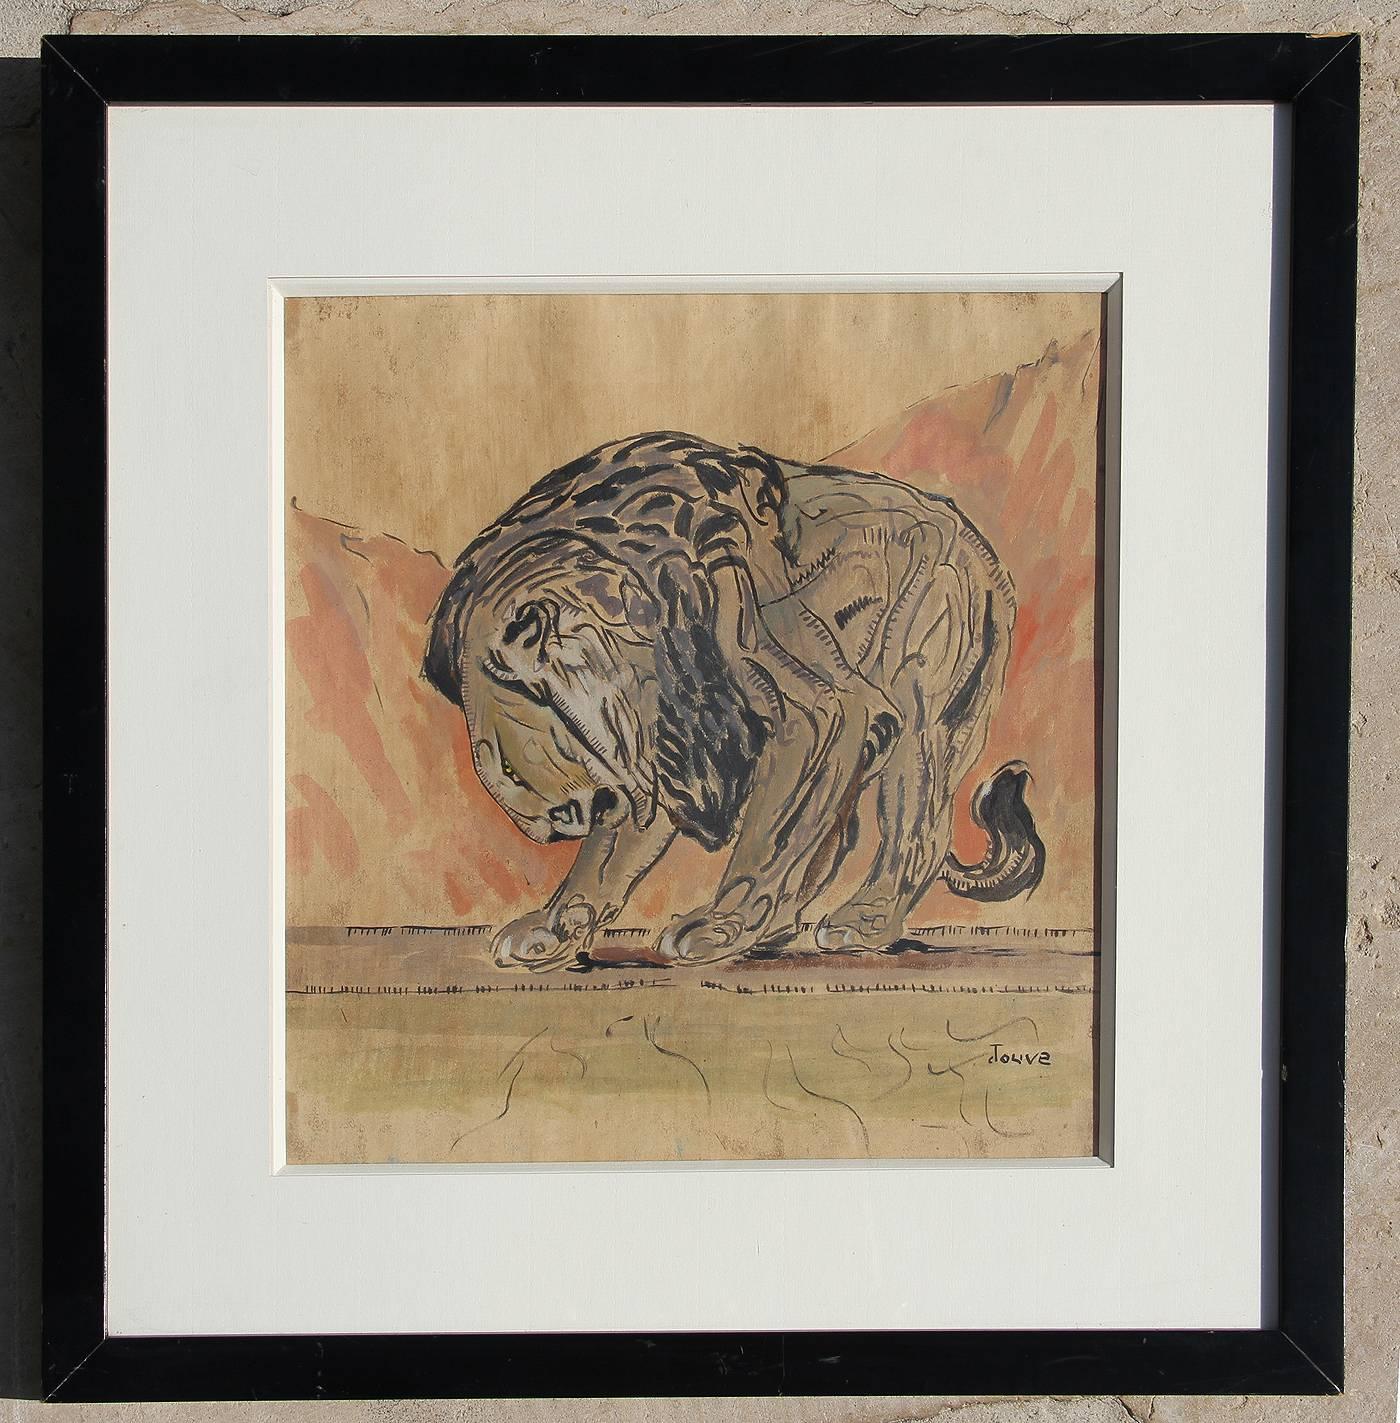 Original oil on paper depicting a lion. Signed on the bottom right. Stamp of authenticity on the back. Matted and framed.

Measurements:
H 10